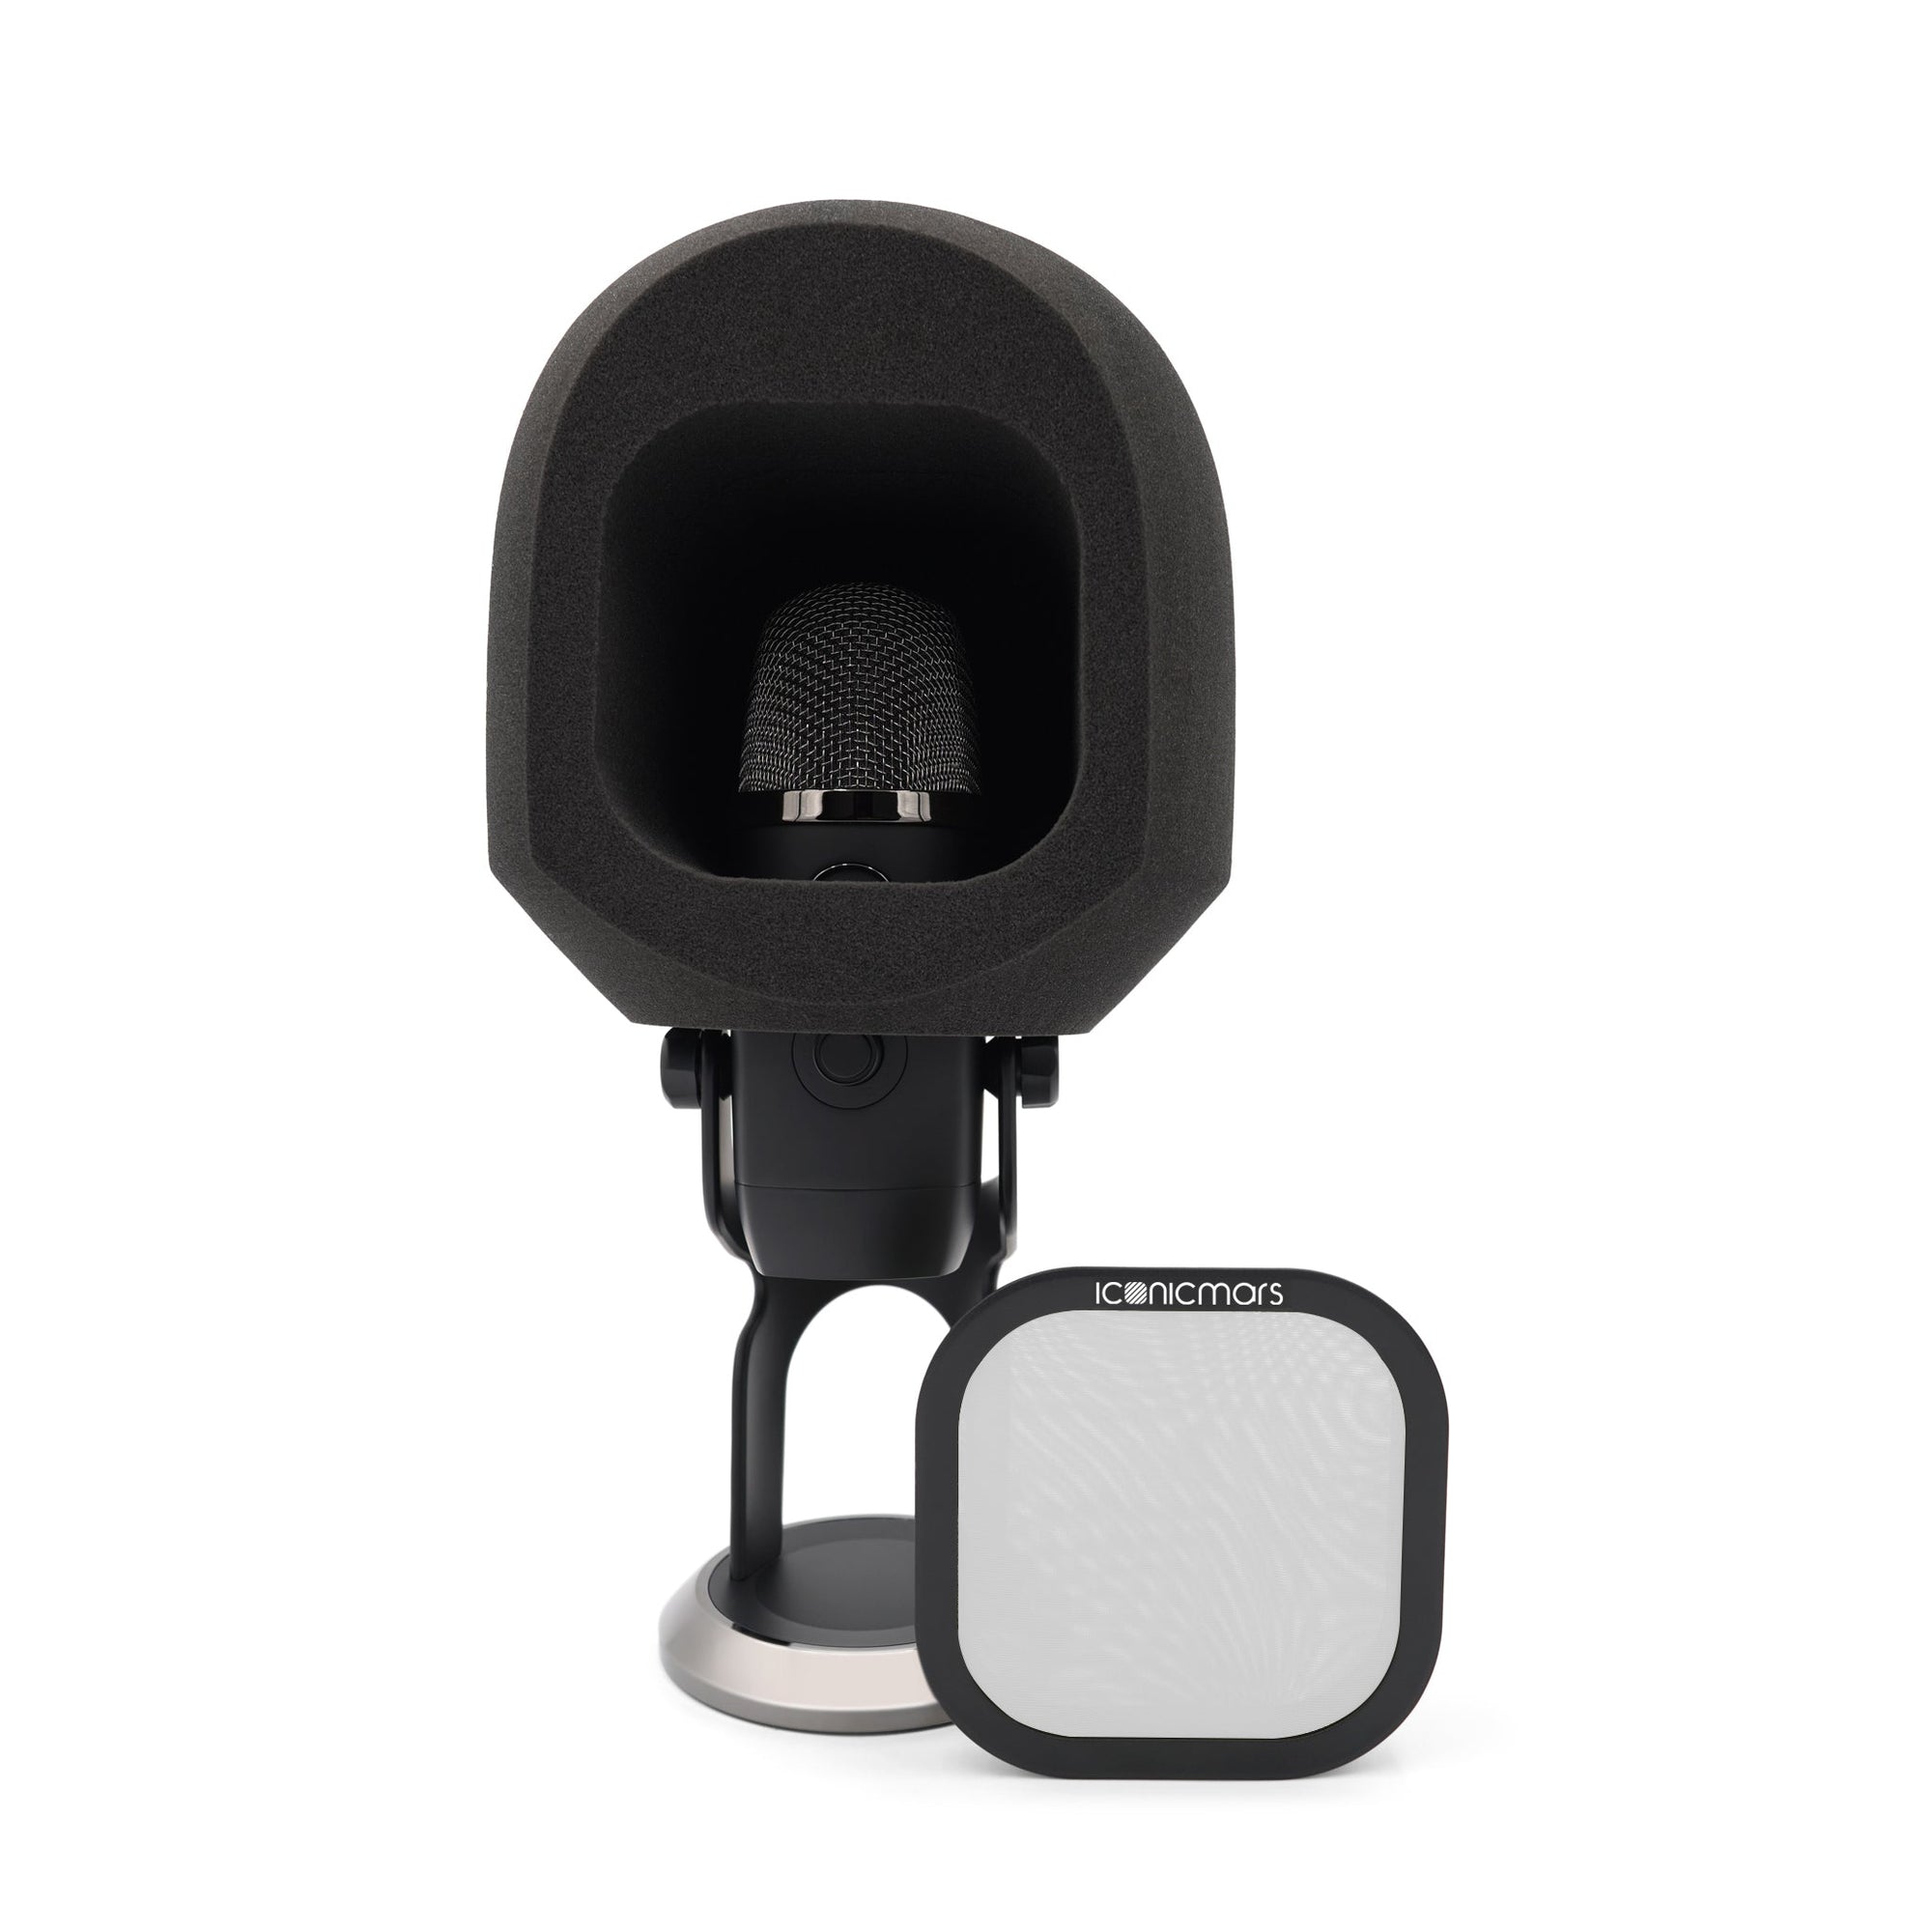 The Comet X Eye ball like isolation booth with pop filter off showing microphone acoustic isolation chamber  -- Soft White